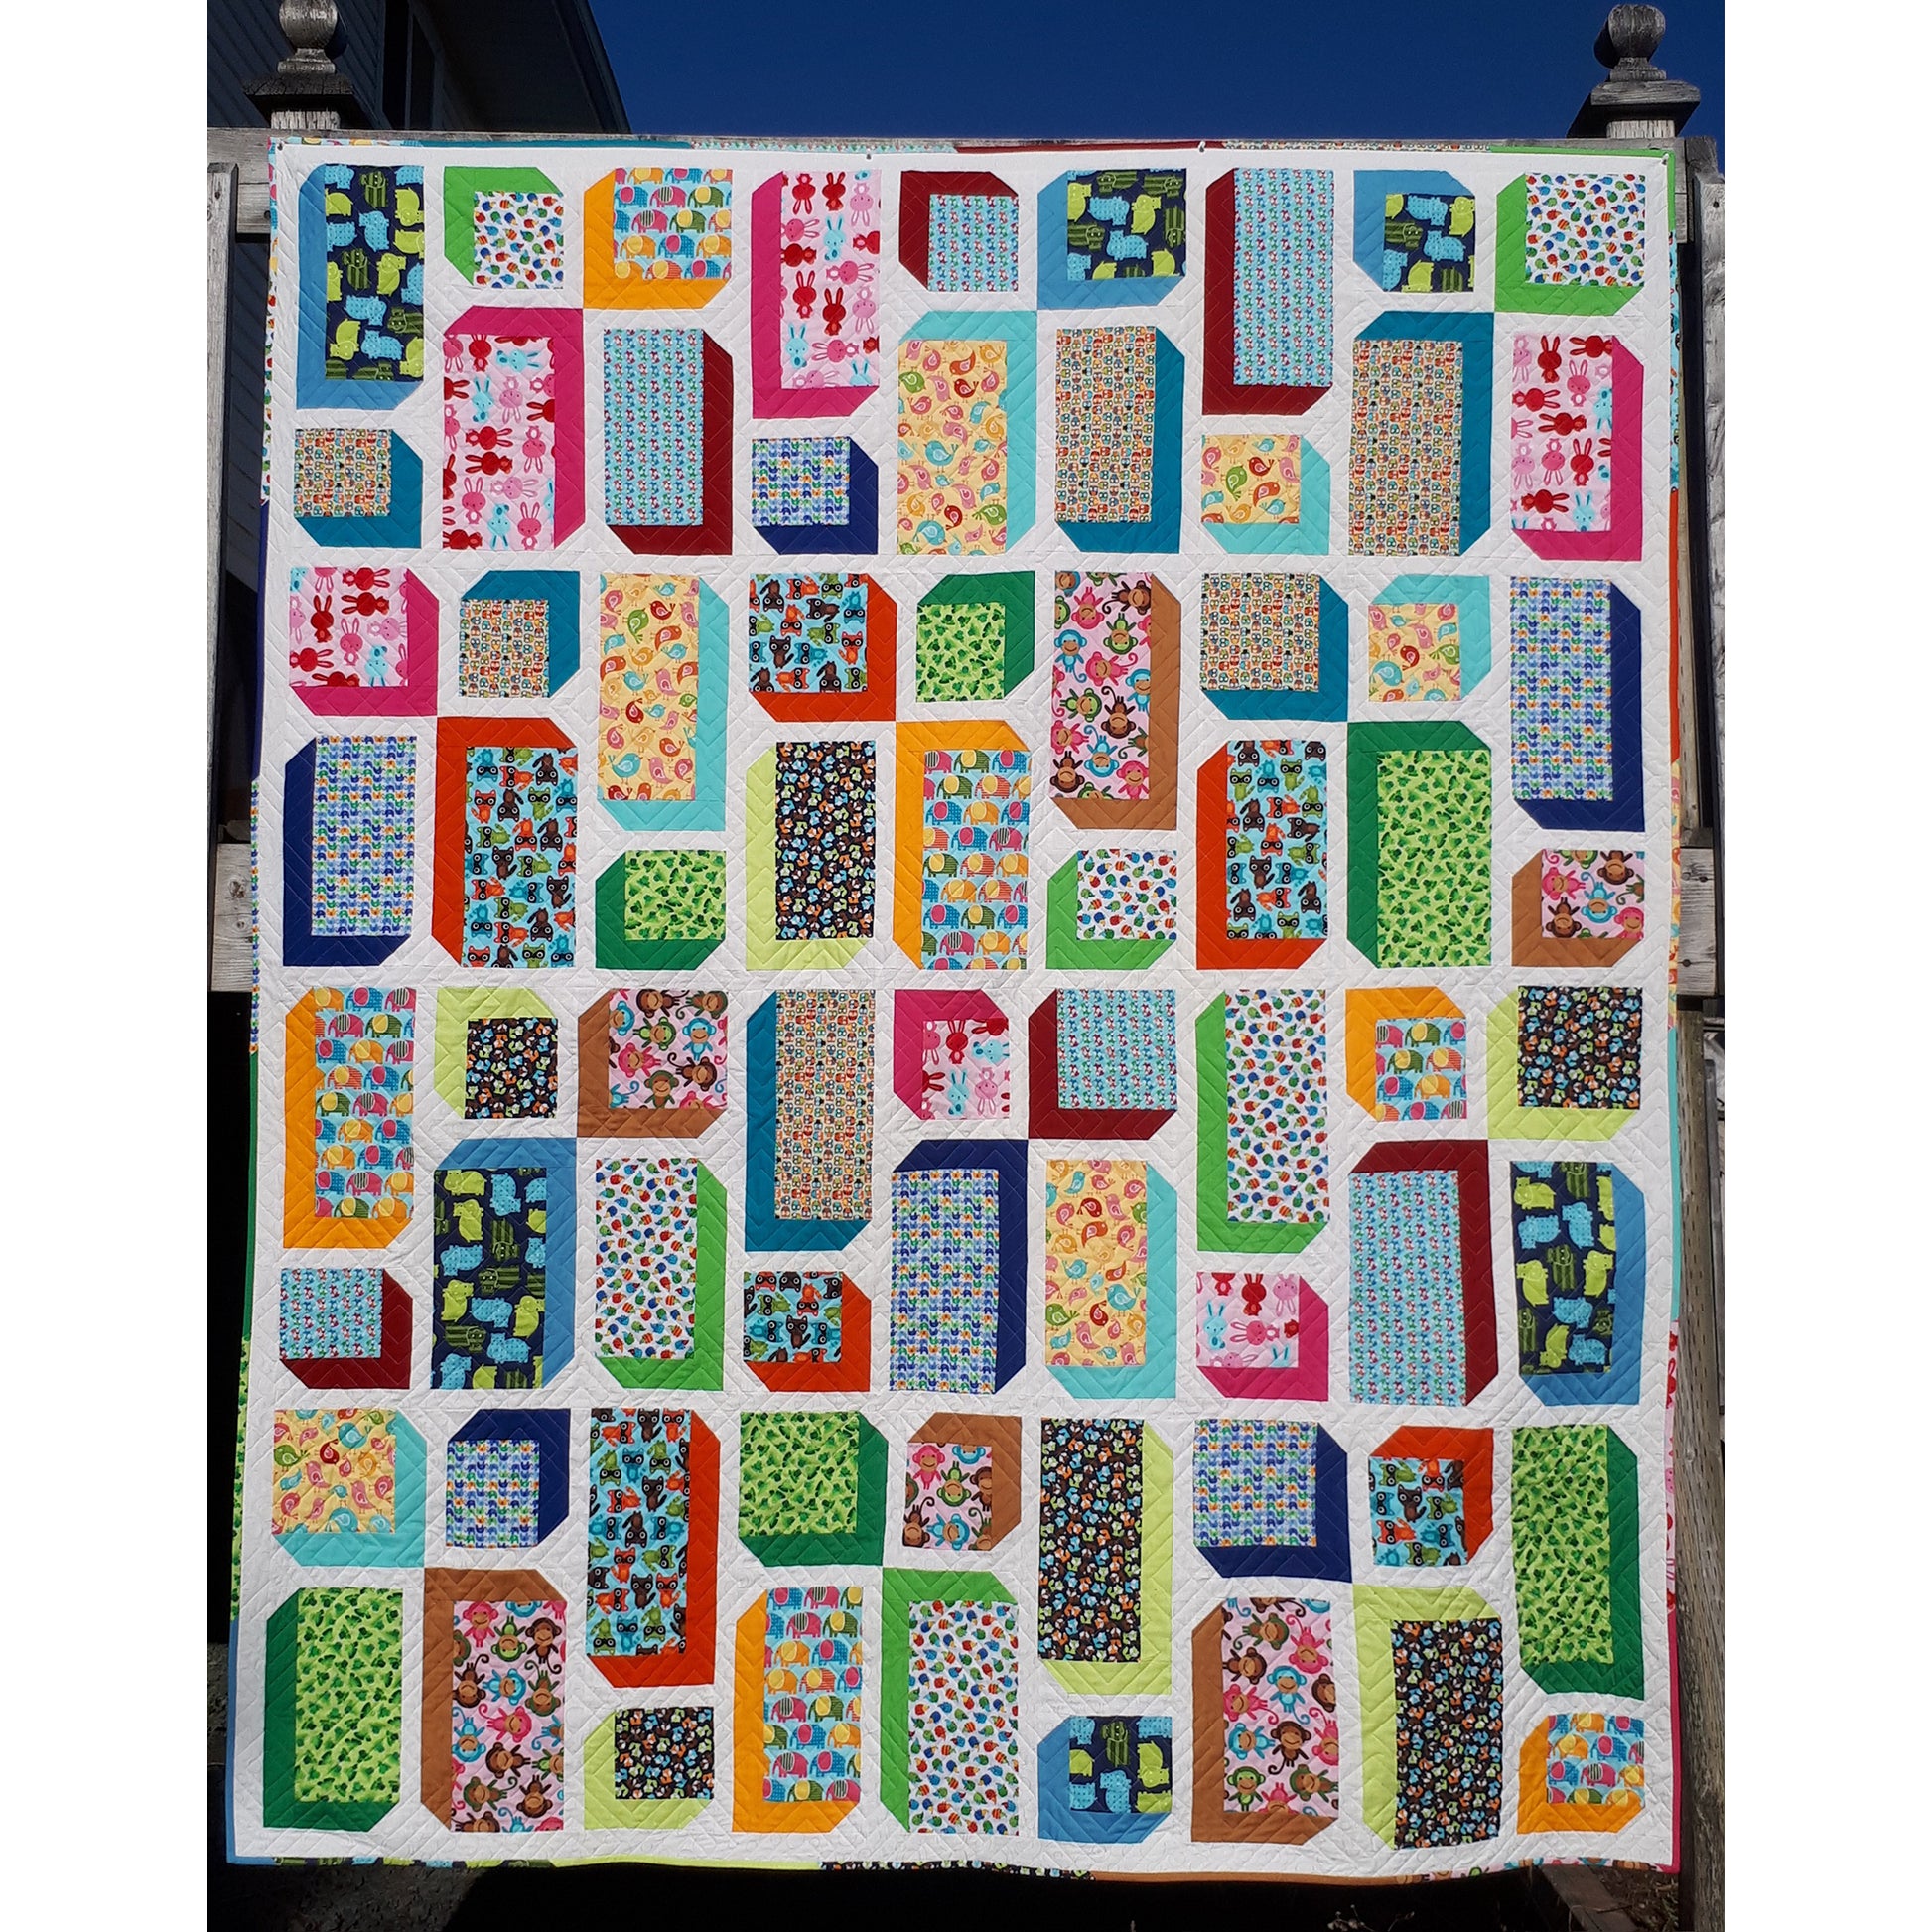  Vibrant modern quilt featuring alternating squares and rectangles in columns. Solid color fabrics on 2 sides of each block create a 3D effect.